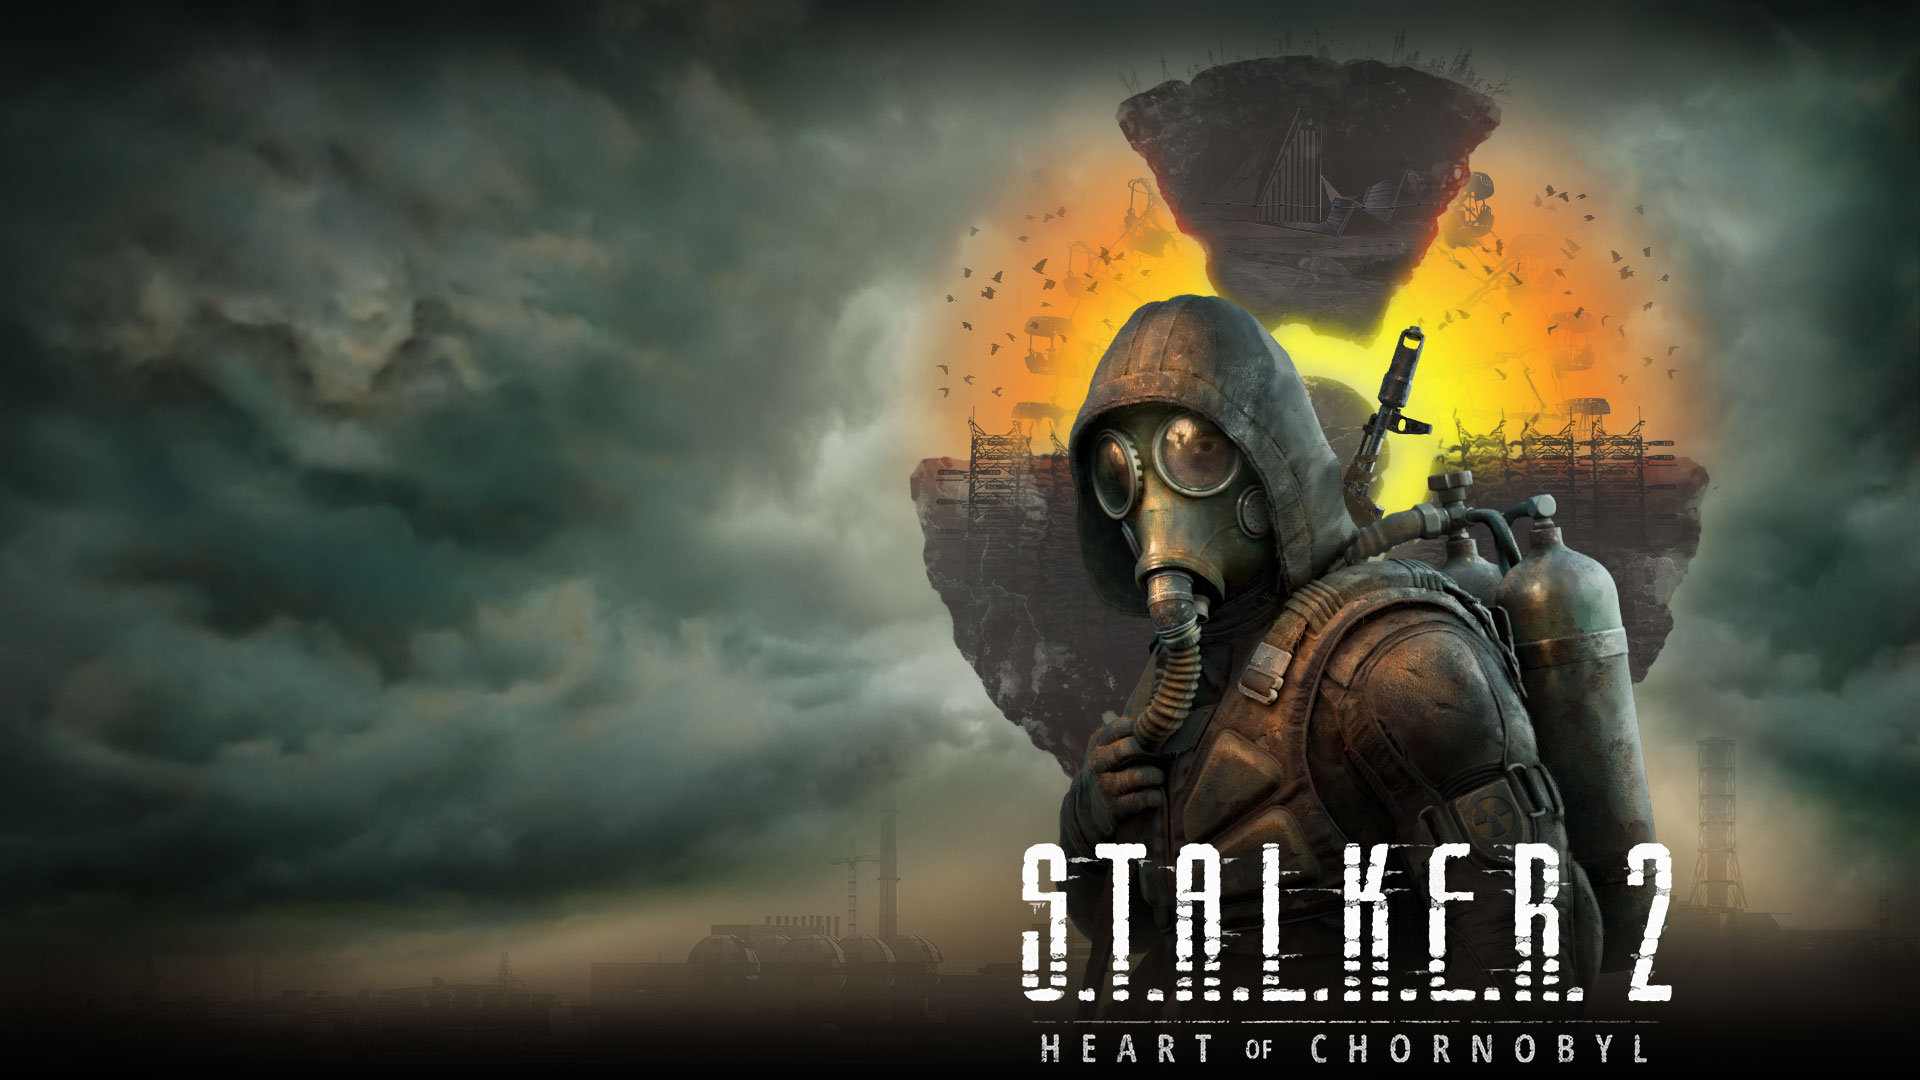 Stalker 2 Heart of Chornobyl, a character stands in front of a floating landscape with clouds and smoke in the air.